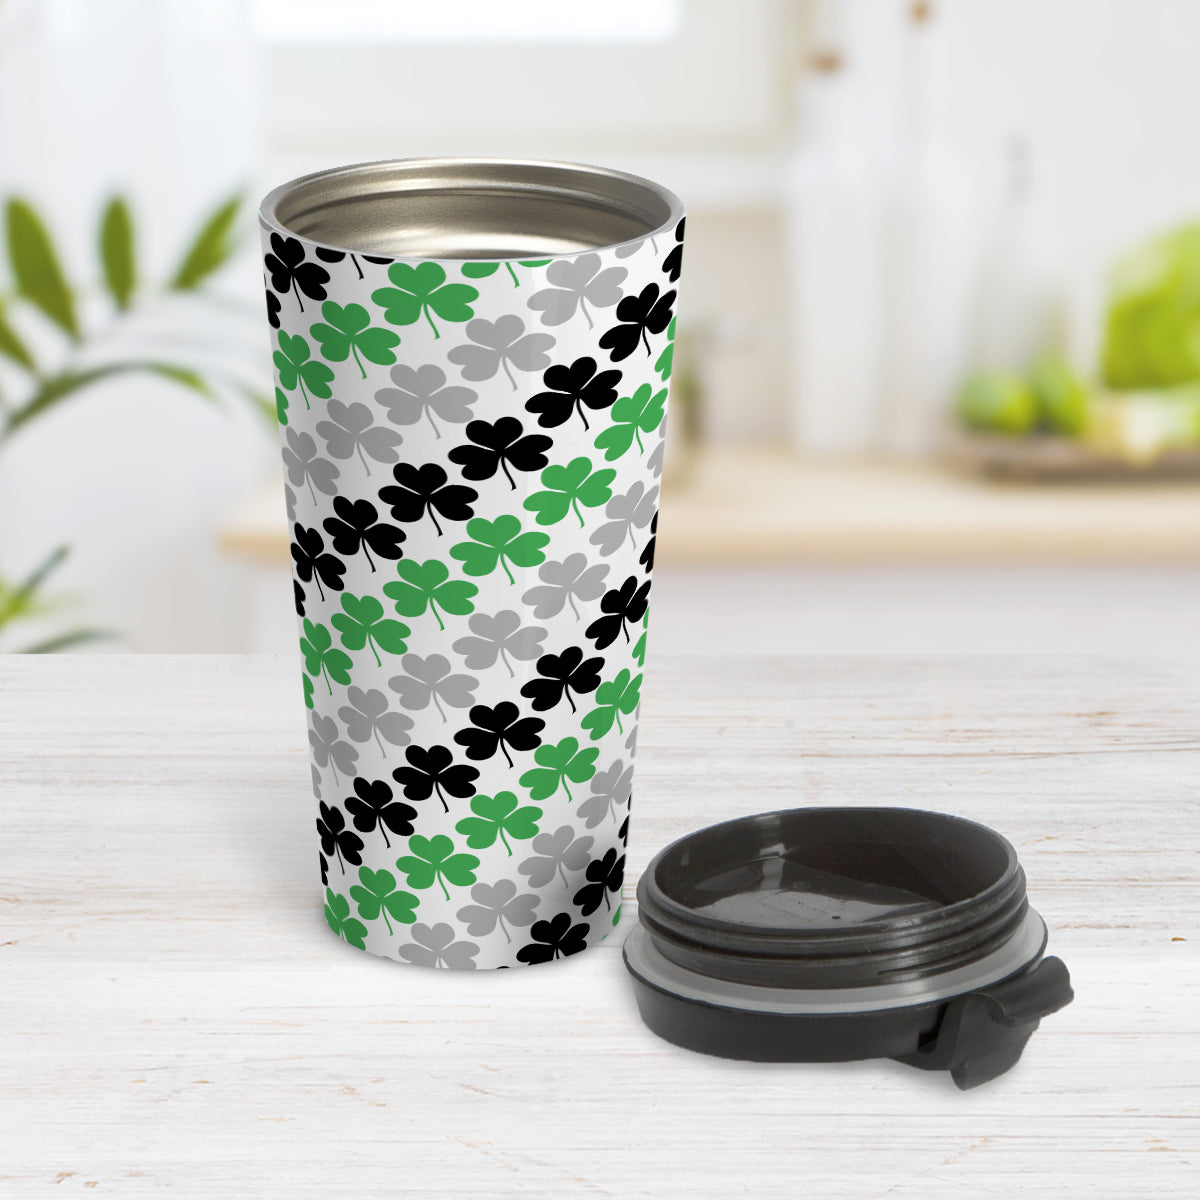 Green Black and Gray Clovers Travel Mug (15oz, stainless steel insulated) at Amy's Coffee Mugs